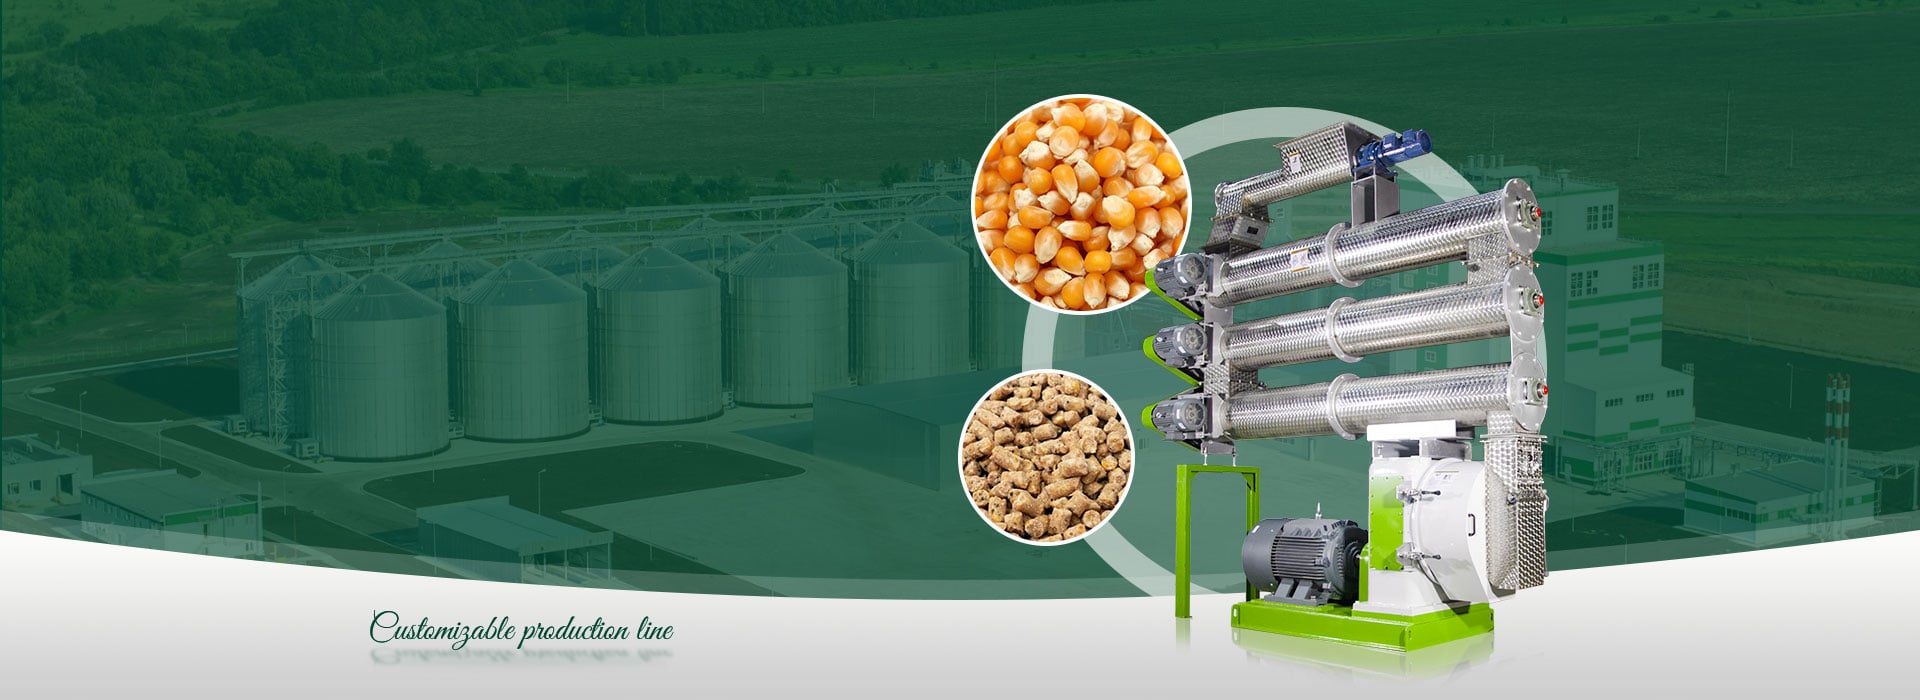 feed processing machinery banner